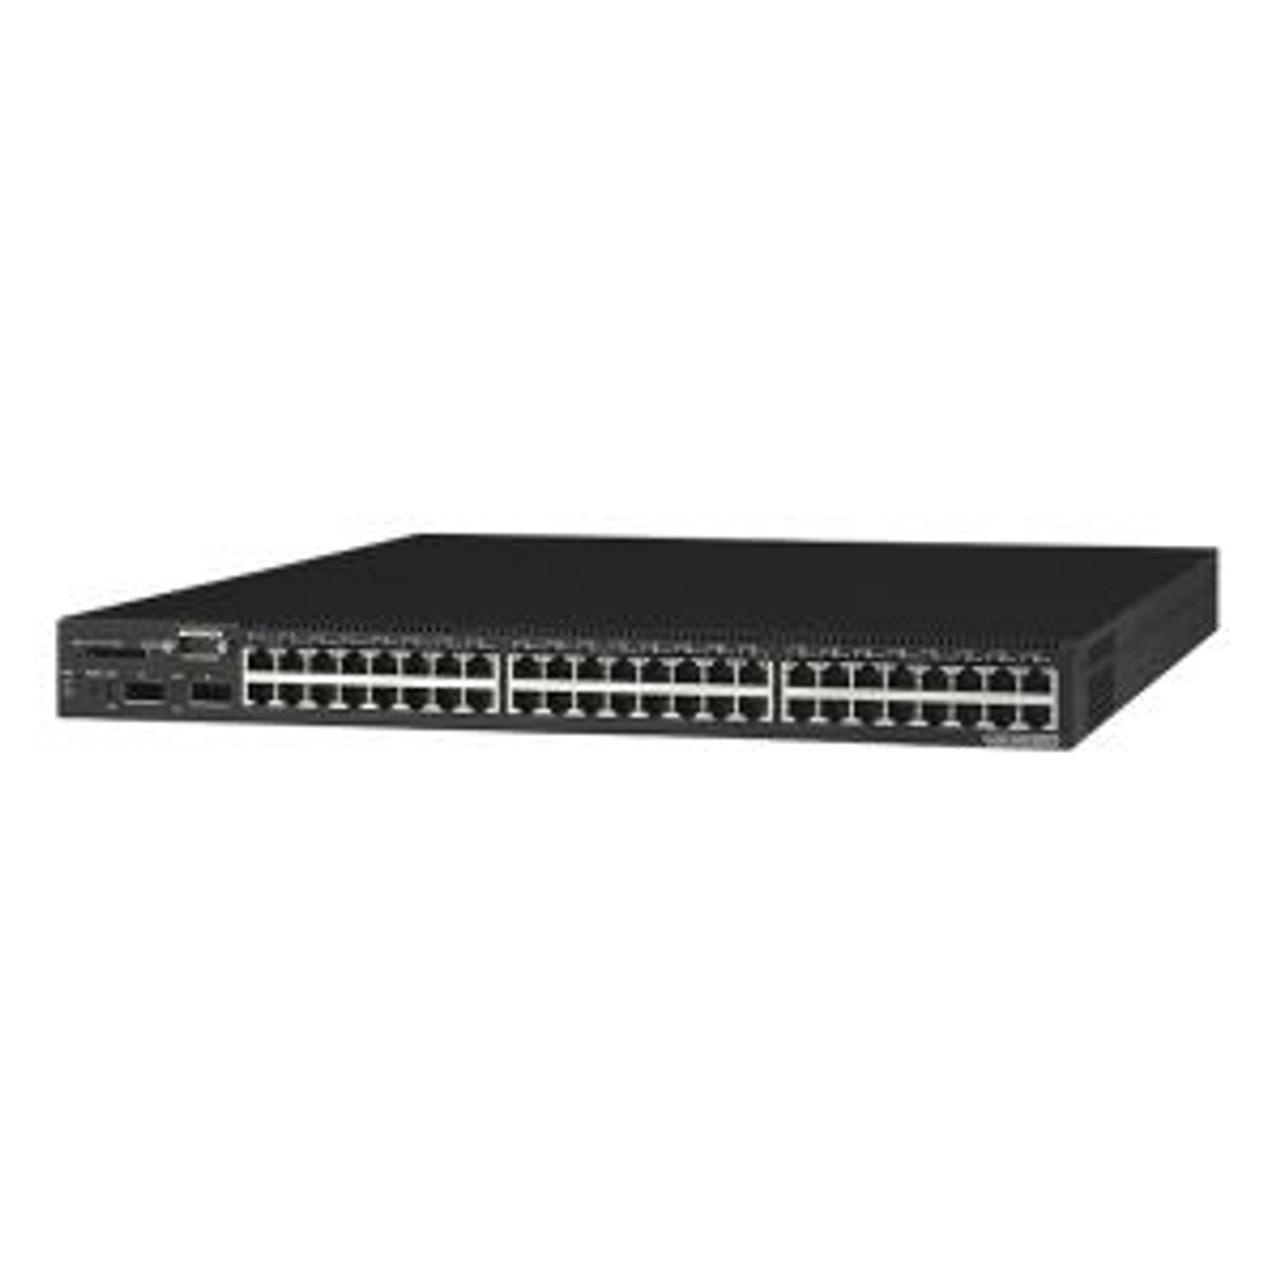 11501 | Extreme | Summit5i 12-Port Ethernet Routing Switch 12 x 1000Base-T LAN 4 x SFP (mini-GBIC) Layer 3 Switch